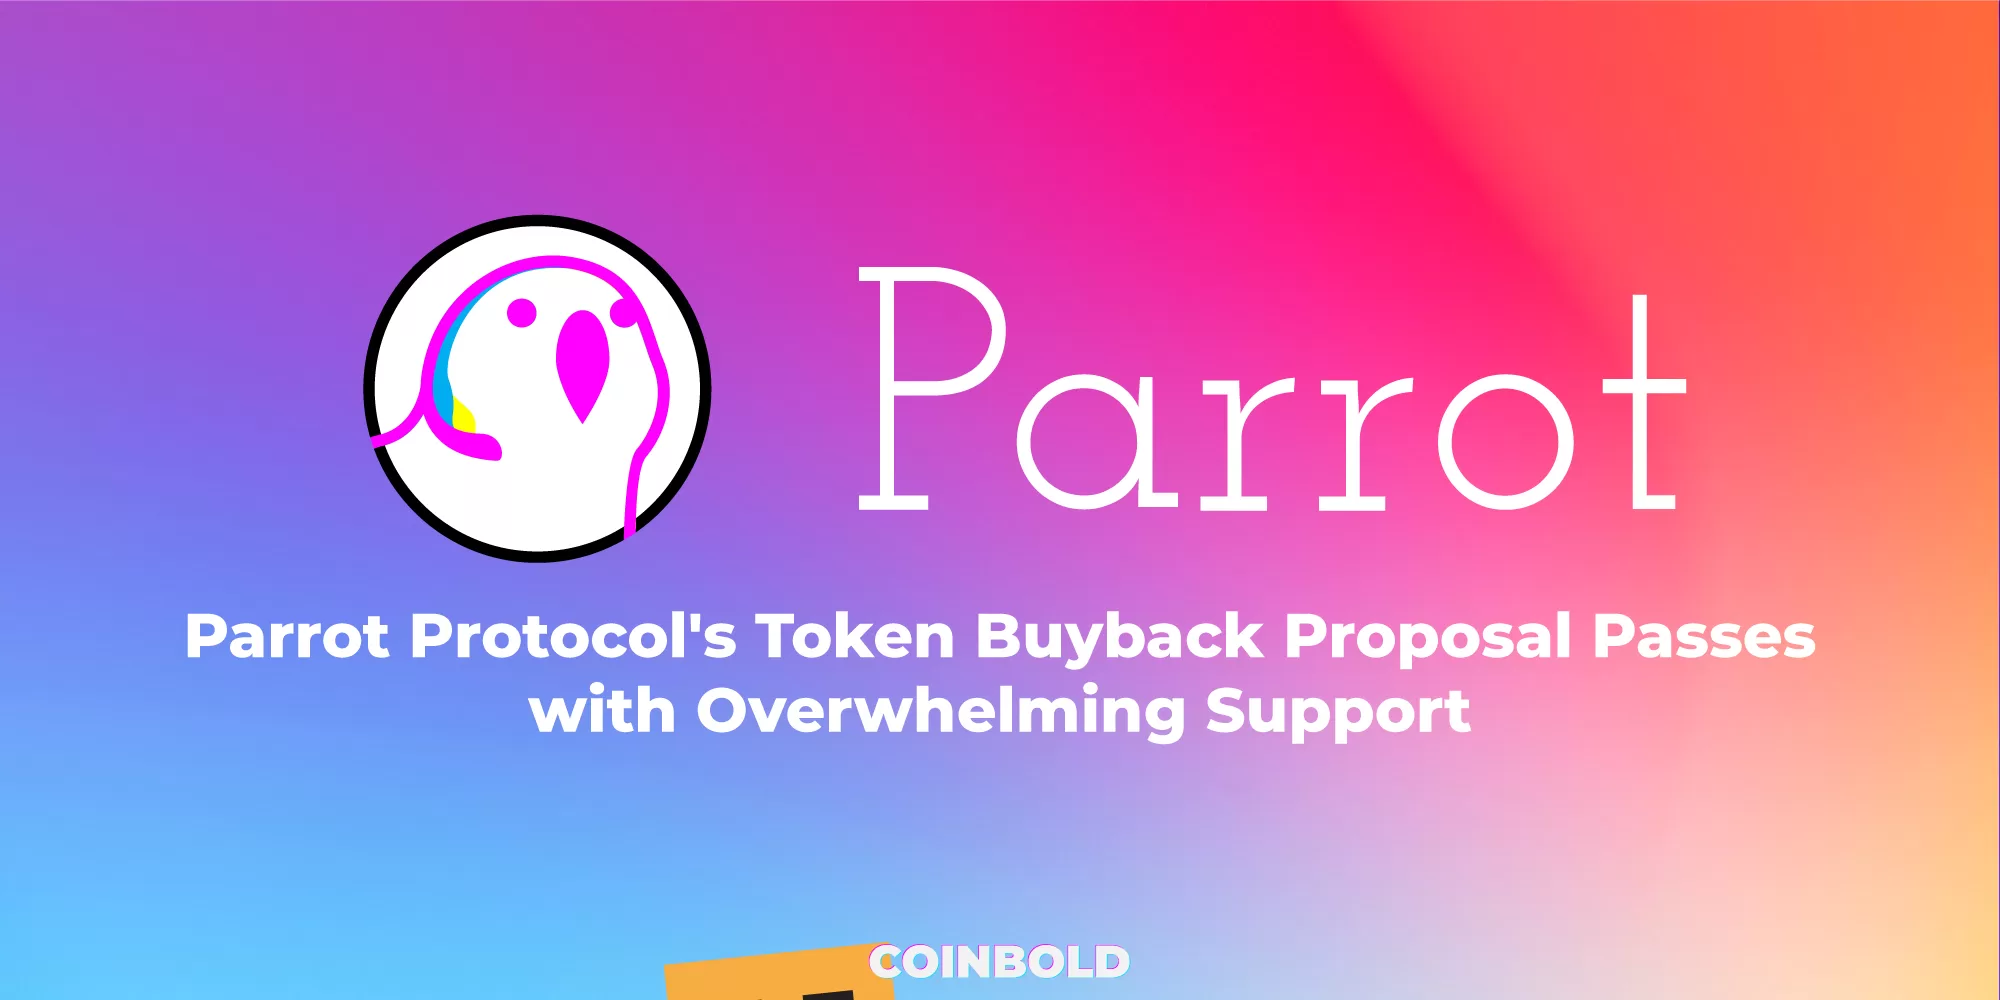 Parrot Protocol's Token Buyback Proposal Passes with Overwhelming Support